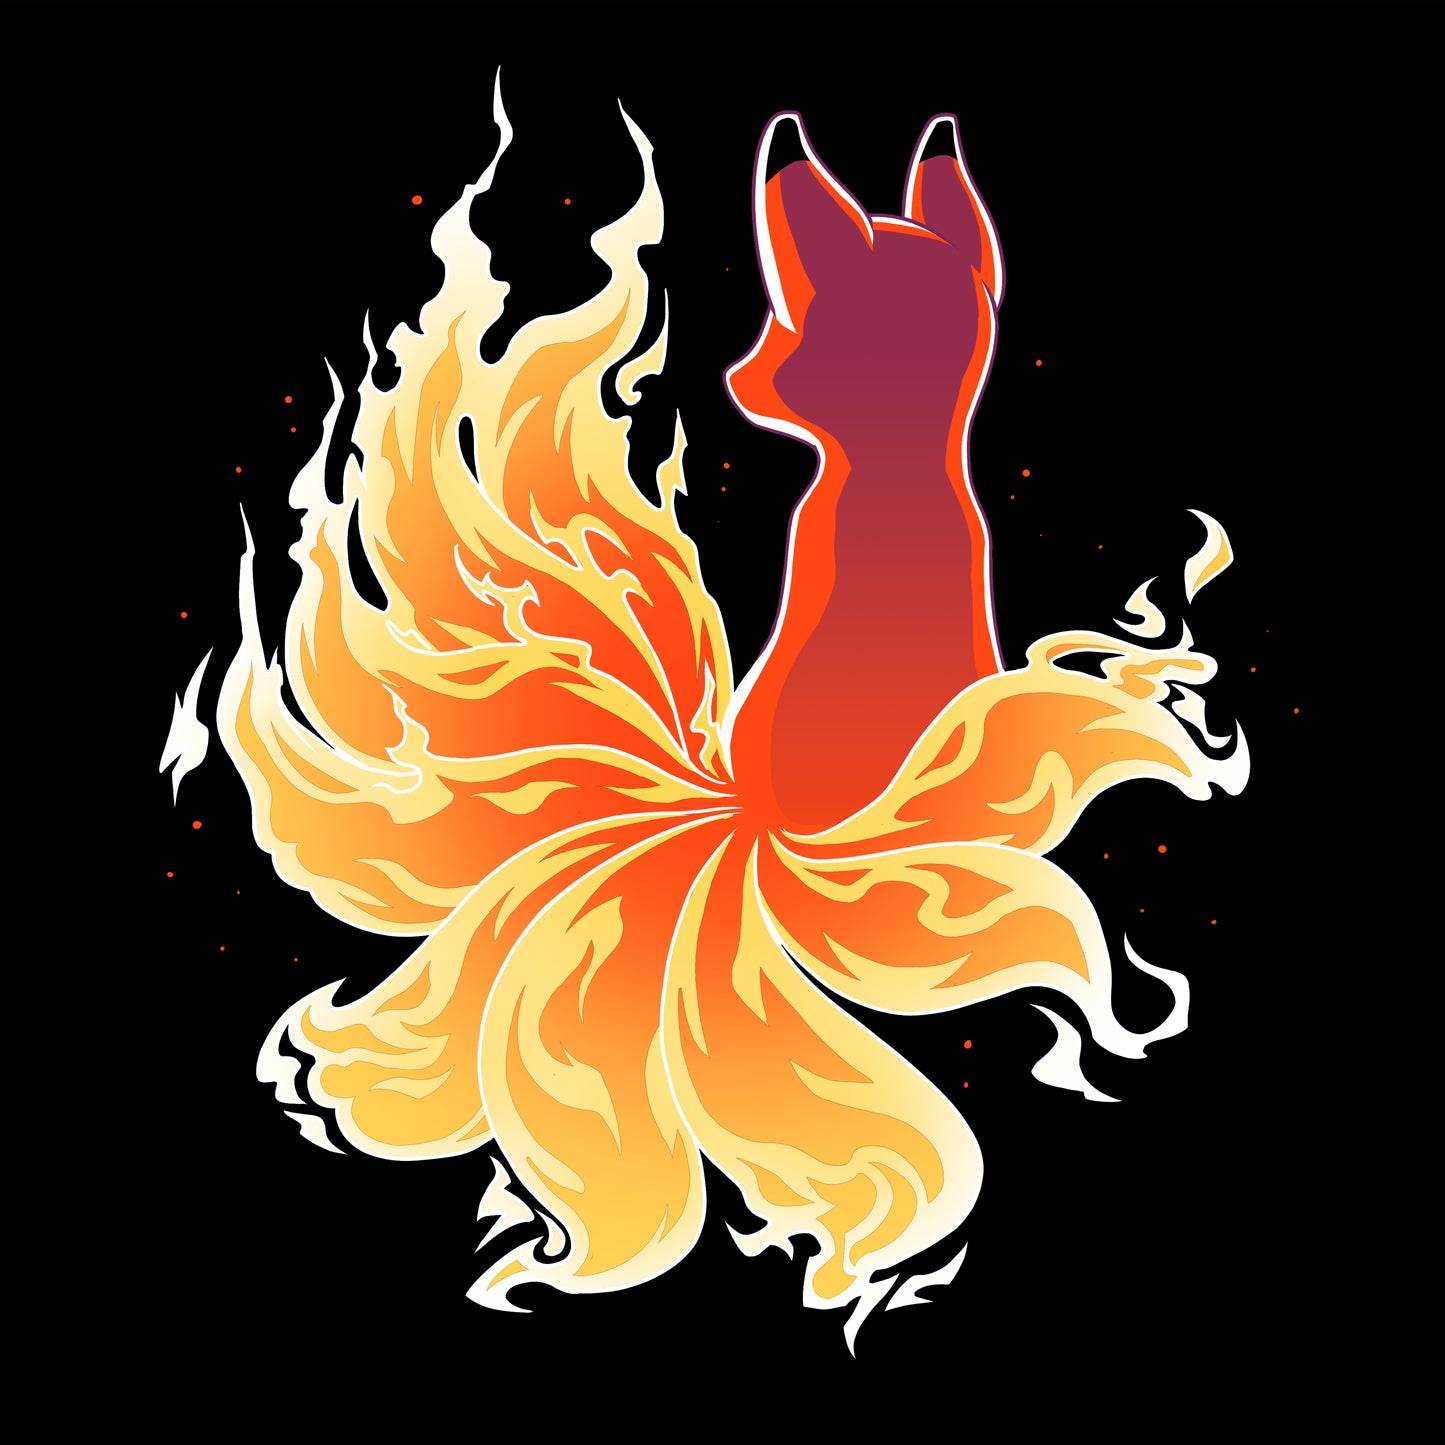 An illustration of a Fire Kitsune with multiple fiery tails, set against a black background. The tails resemble flames, adding a dynamic and mystical look to the fox. This artwork is featured on an unisex tee made from super soft ringspun cotton, offering comfort and style for all. The product is named "Fire Kitsune" by monsterdigital.